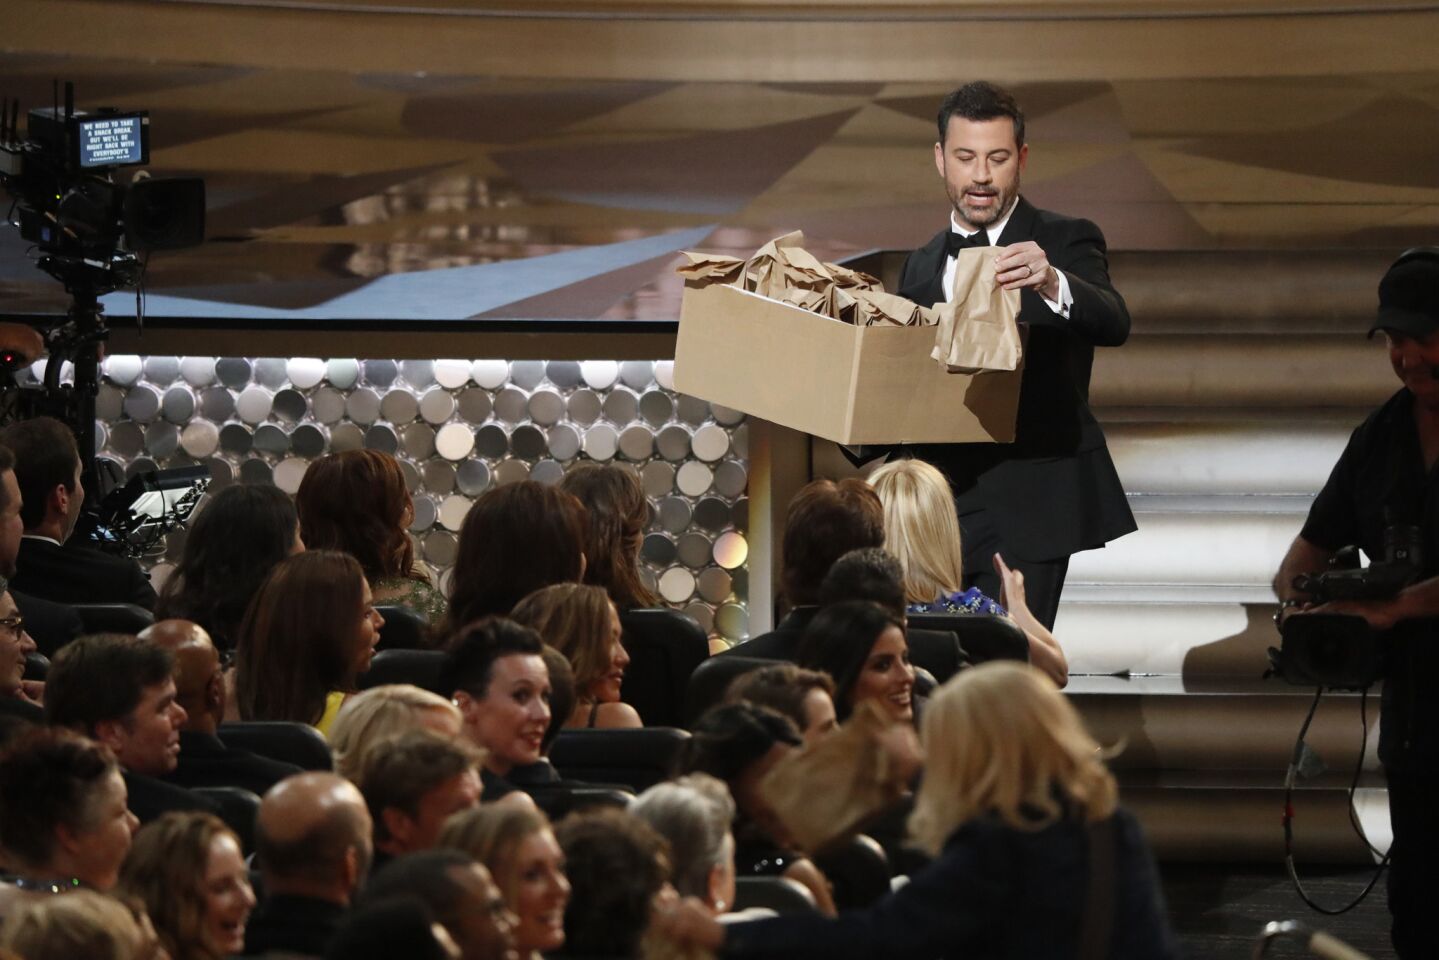 Jimmy Kimmel hands out peanut butter and jelly sandwiches made by his mother during the show.